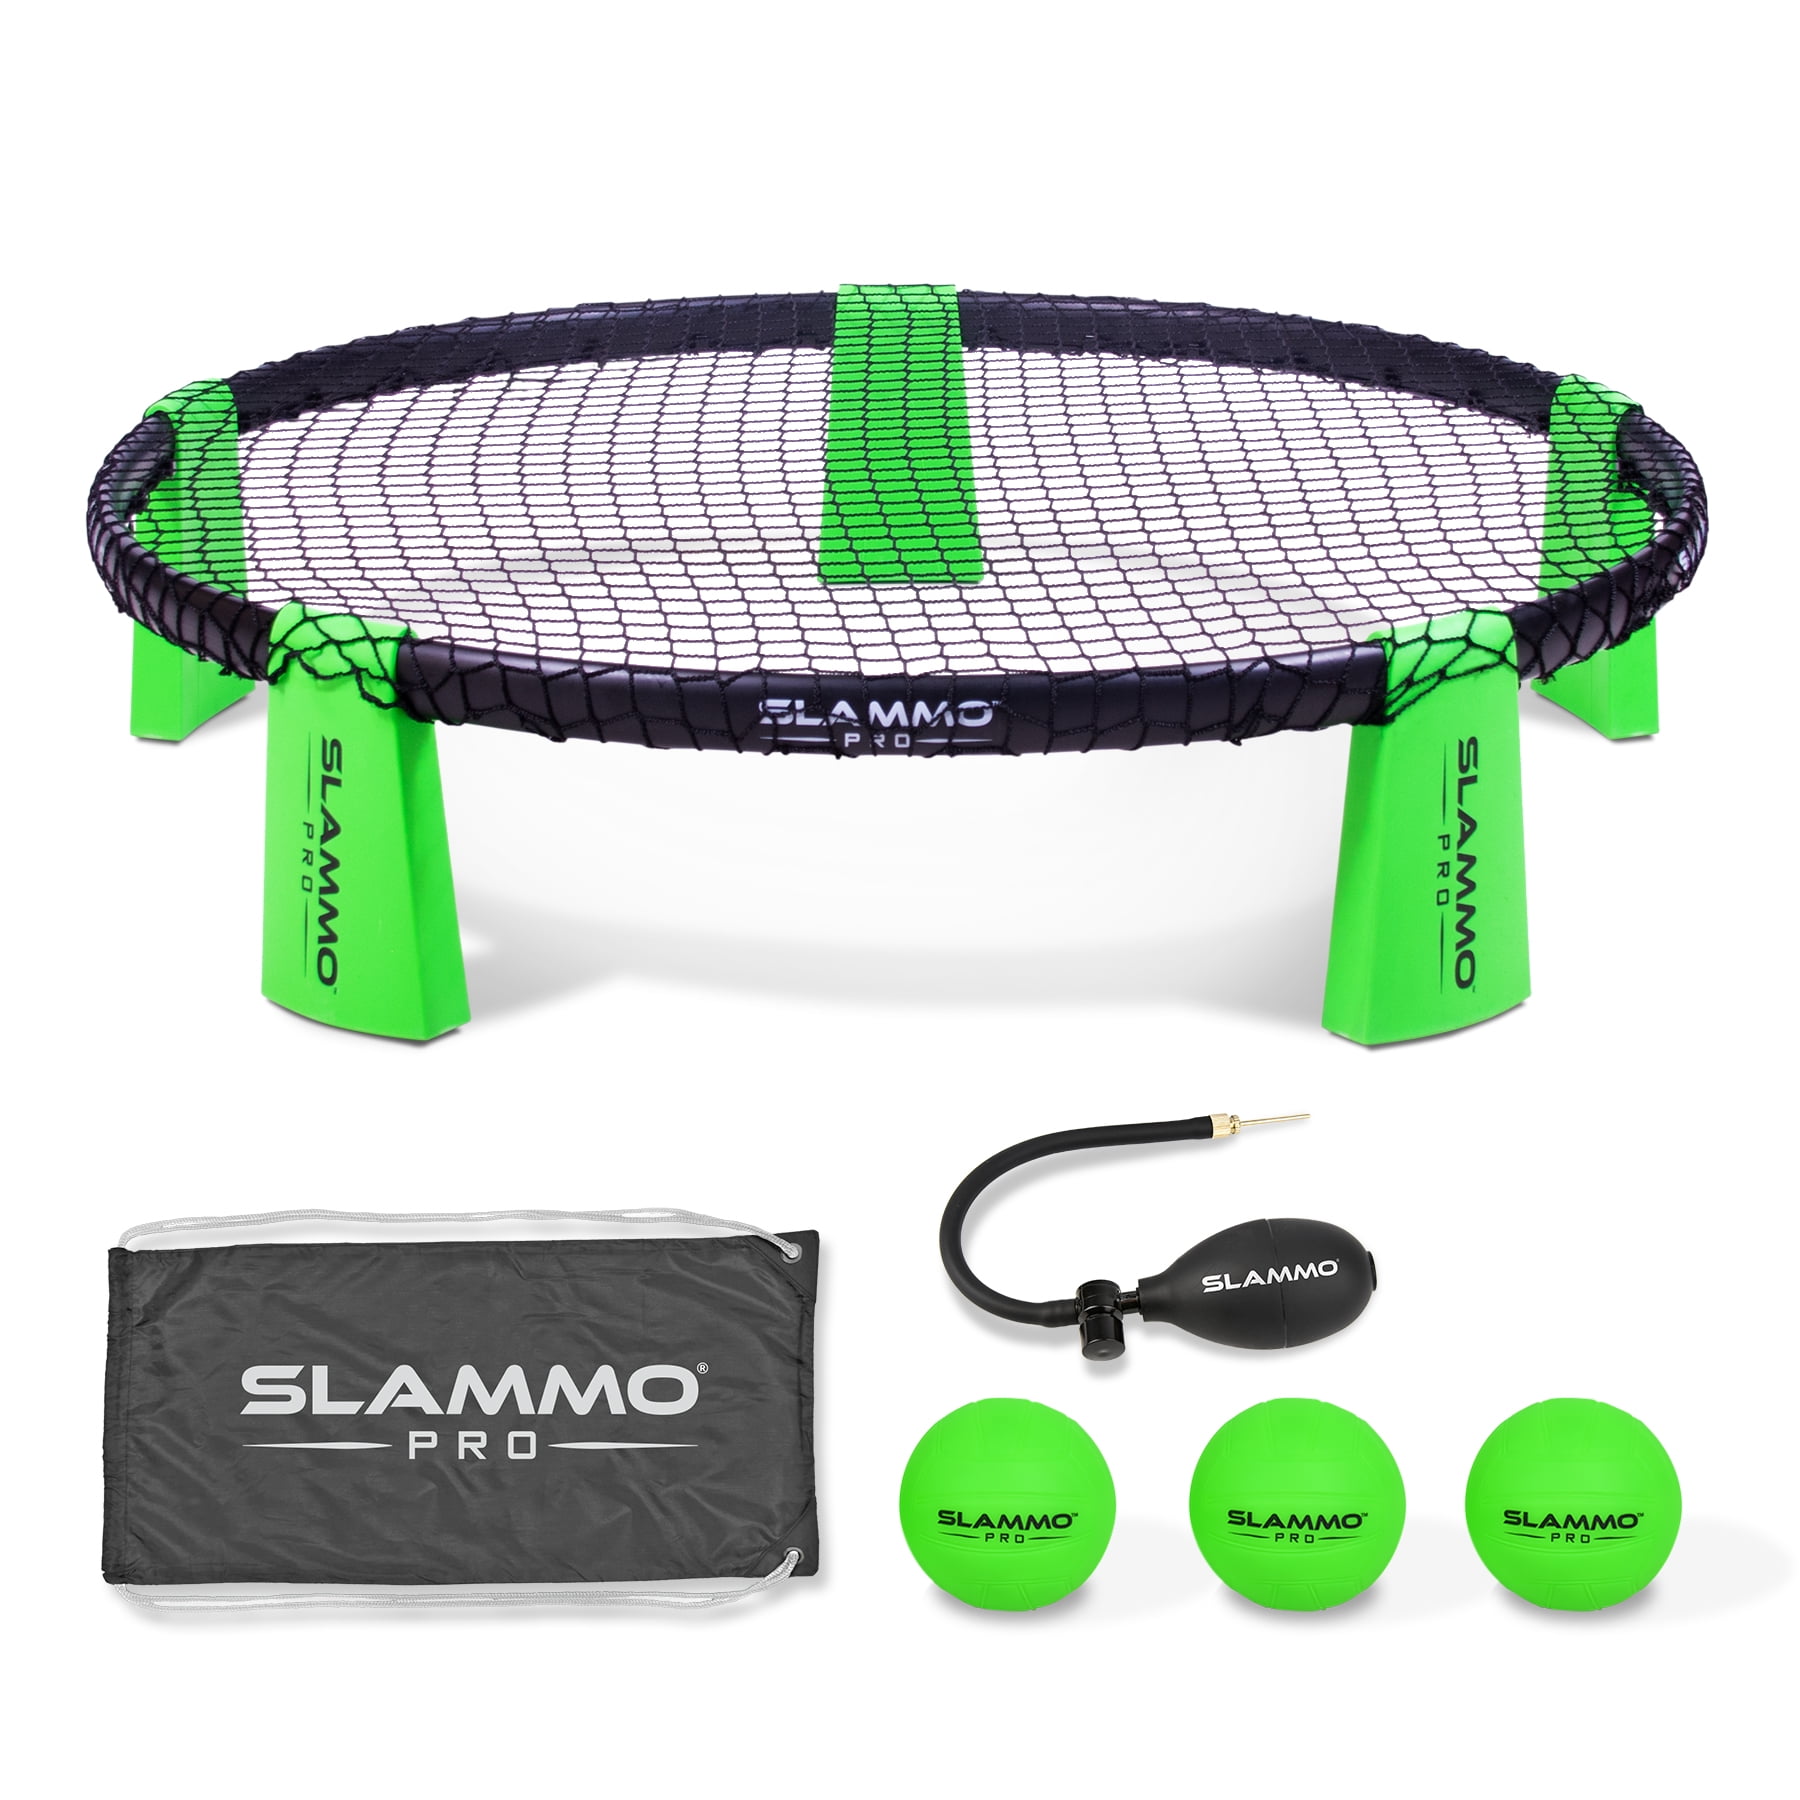 Spikeball Pro Kit Includes Upgraded Stronger Playing Net Tournament Edition 